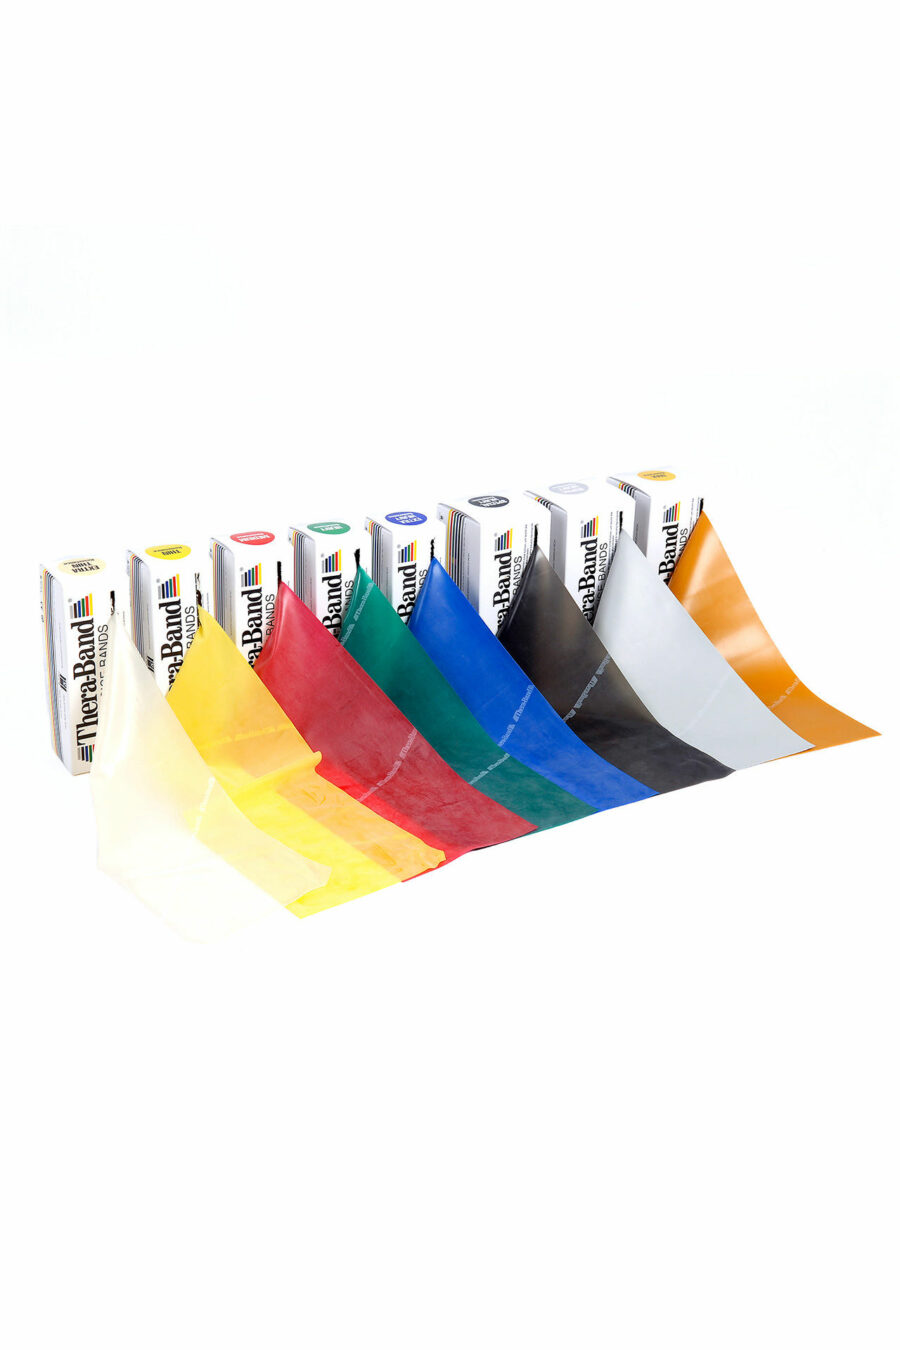 thera band 500cm all colours fengbao kung fu shop 1080 wien